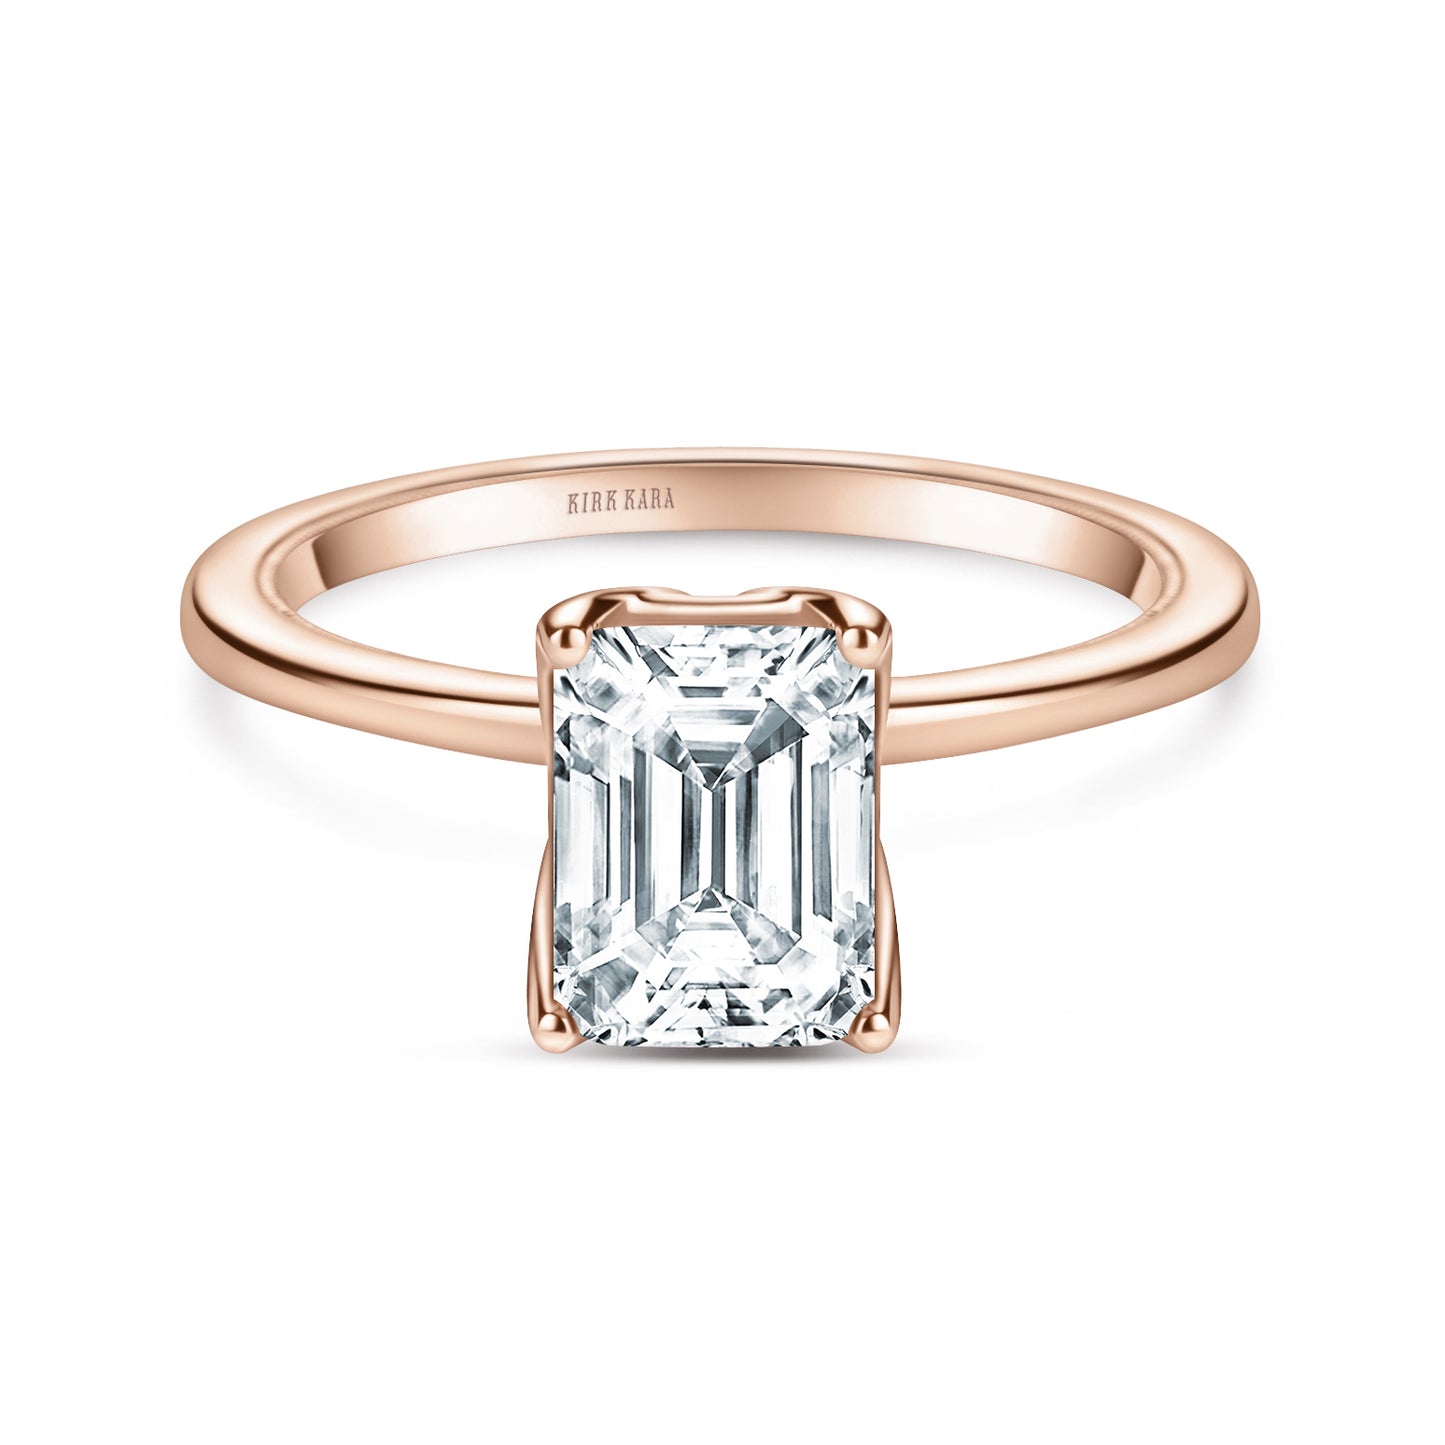 Hidden Halo Solitaire Engagement Ring